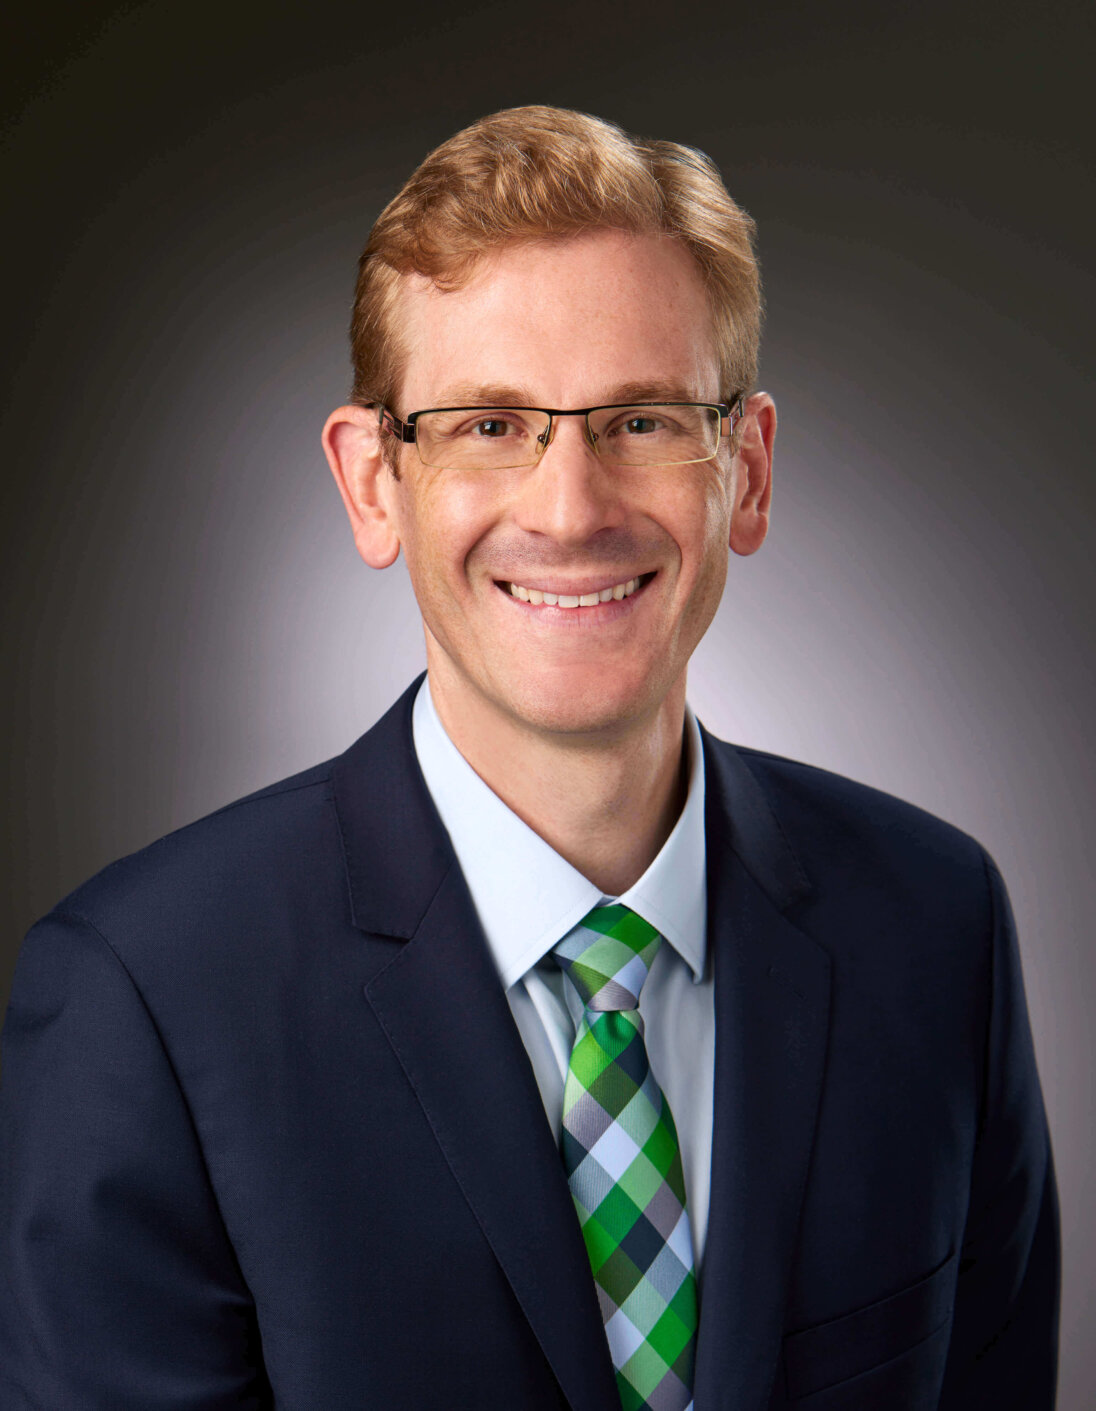 Portrait of Andrew Pisansky, MD, pain management doctor at Twin Cities Pain Clinic